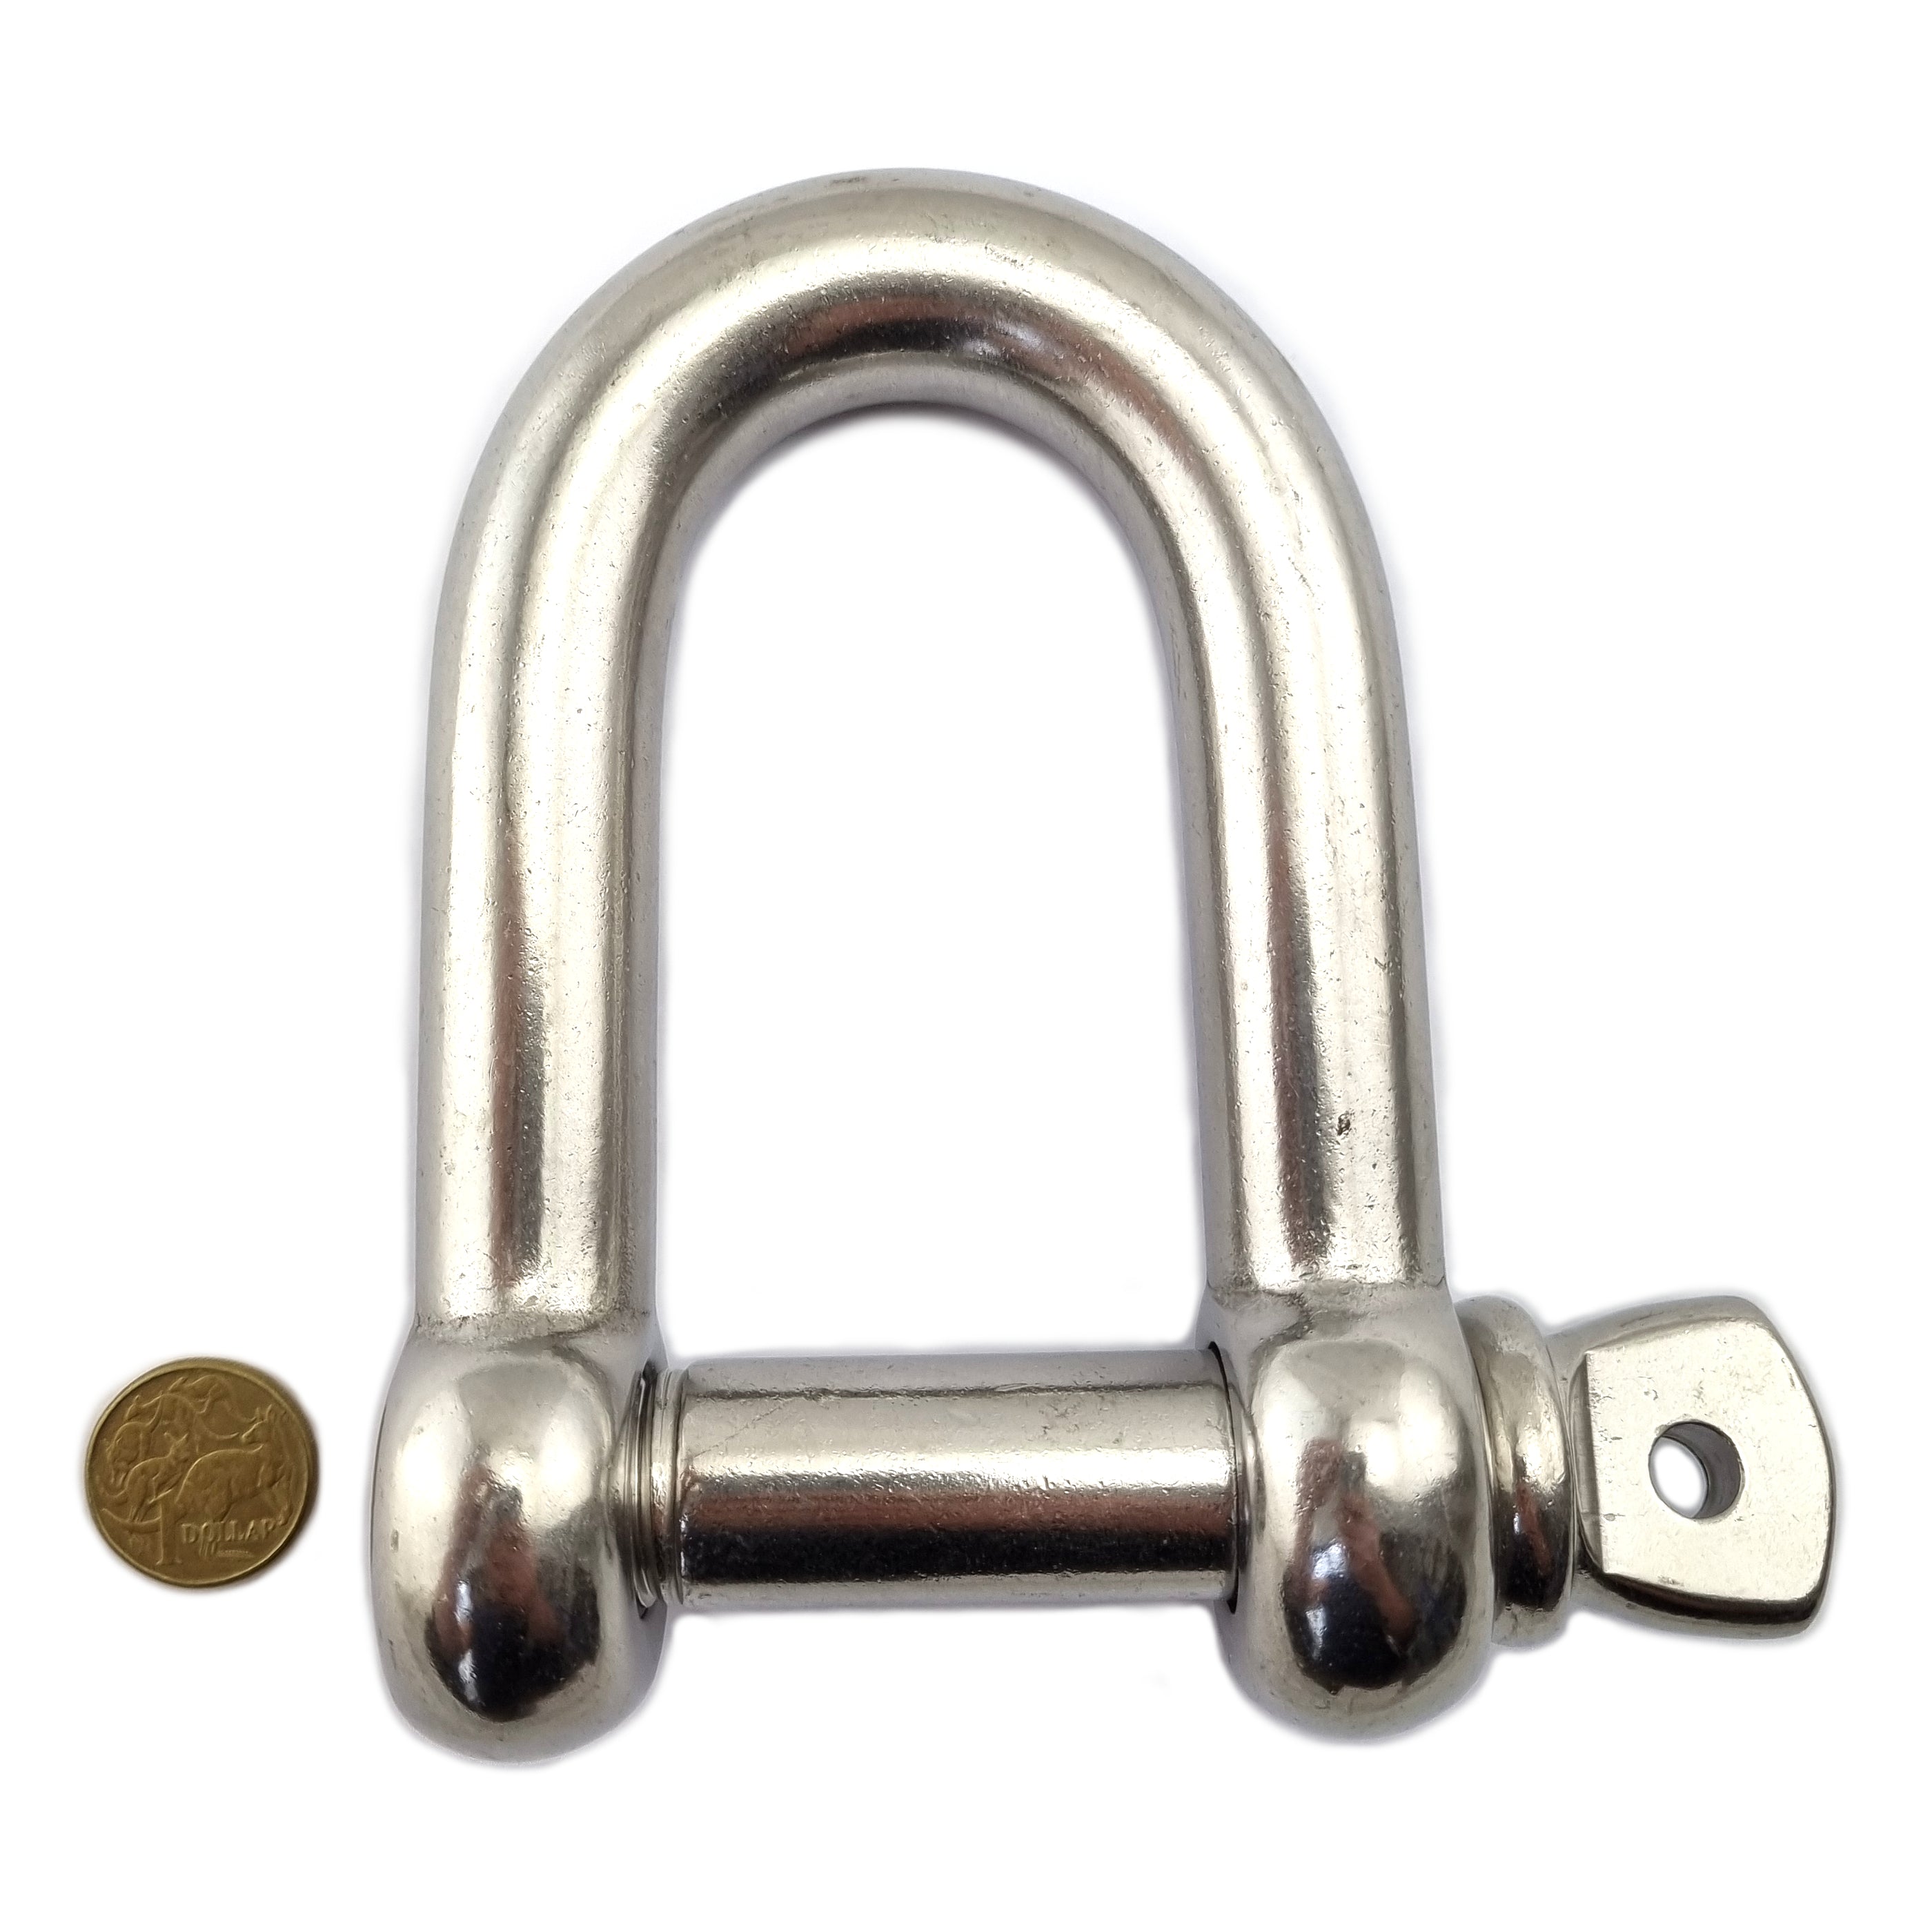 25mm D Shackle in type 316 marine-grade stainless steel. Shop chain.com.au